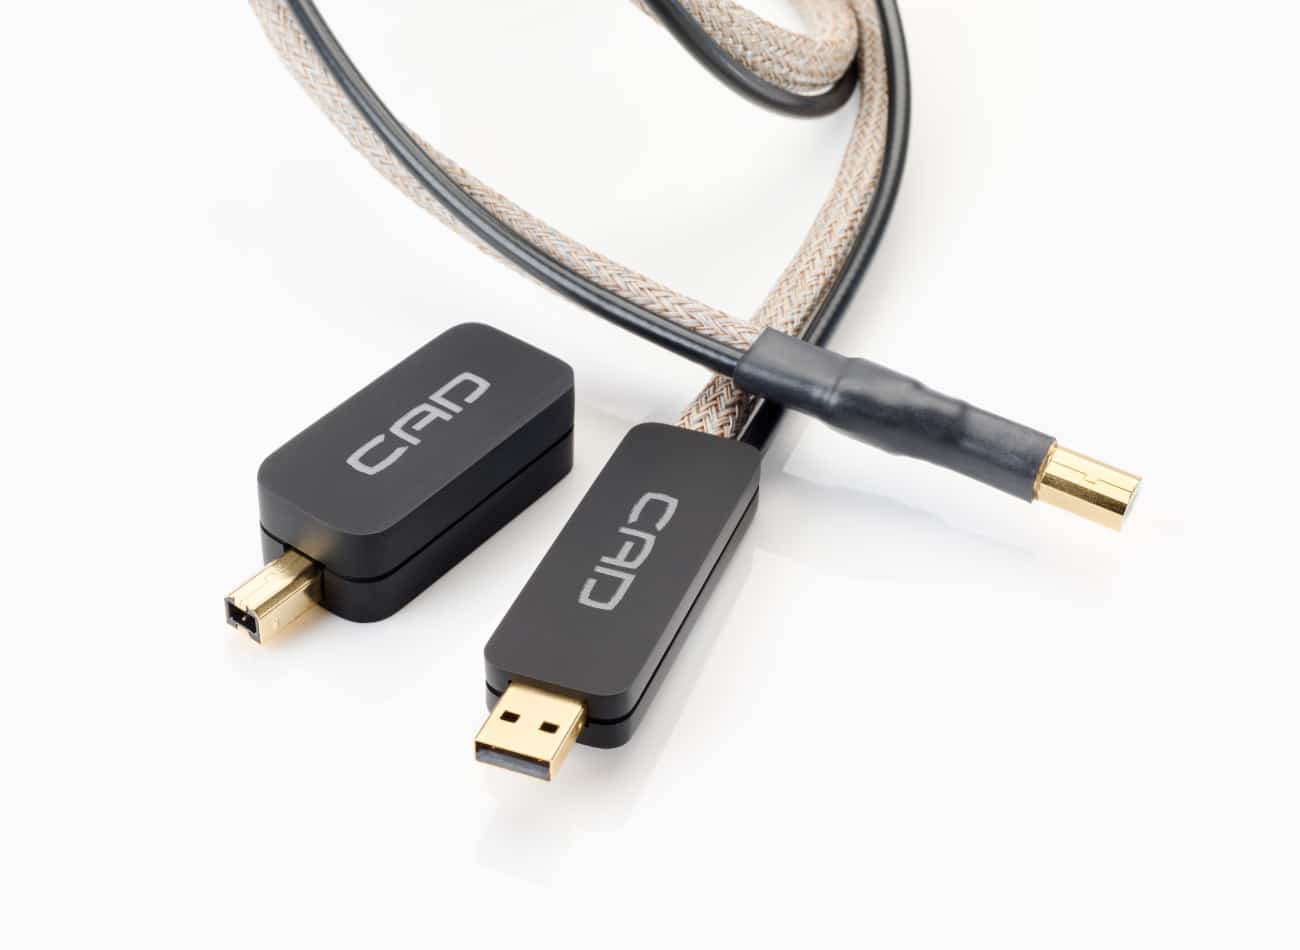 the CAD USB II-R cable alongside the CAD USB filter, both new for December 2022